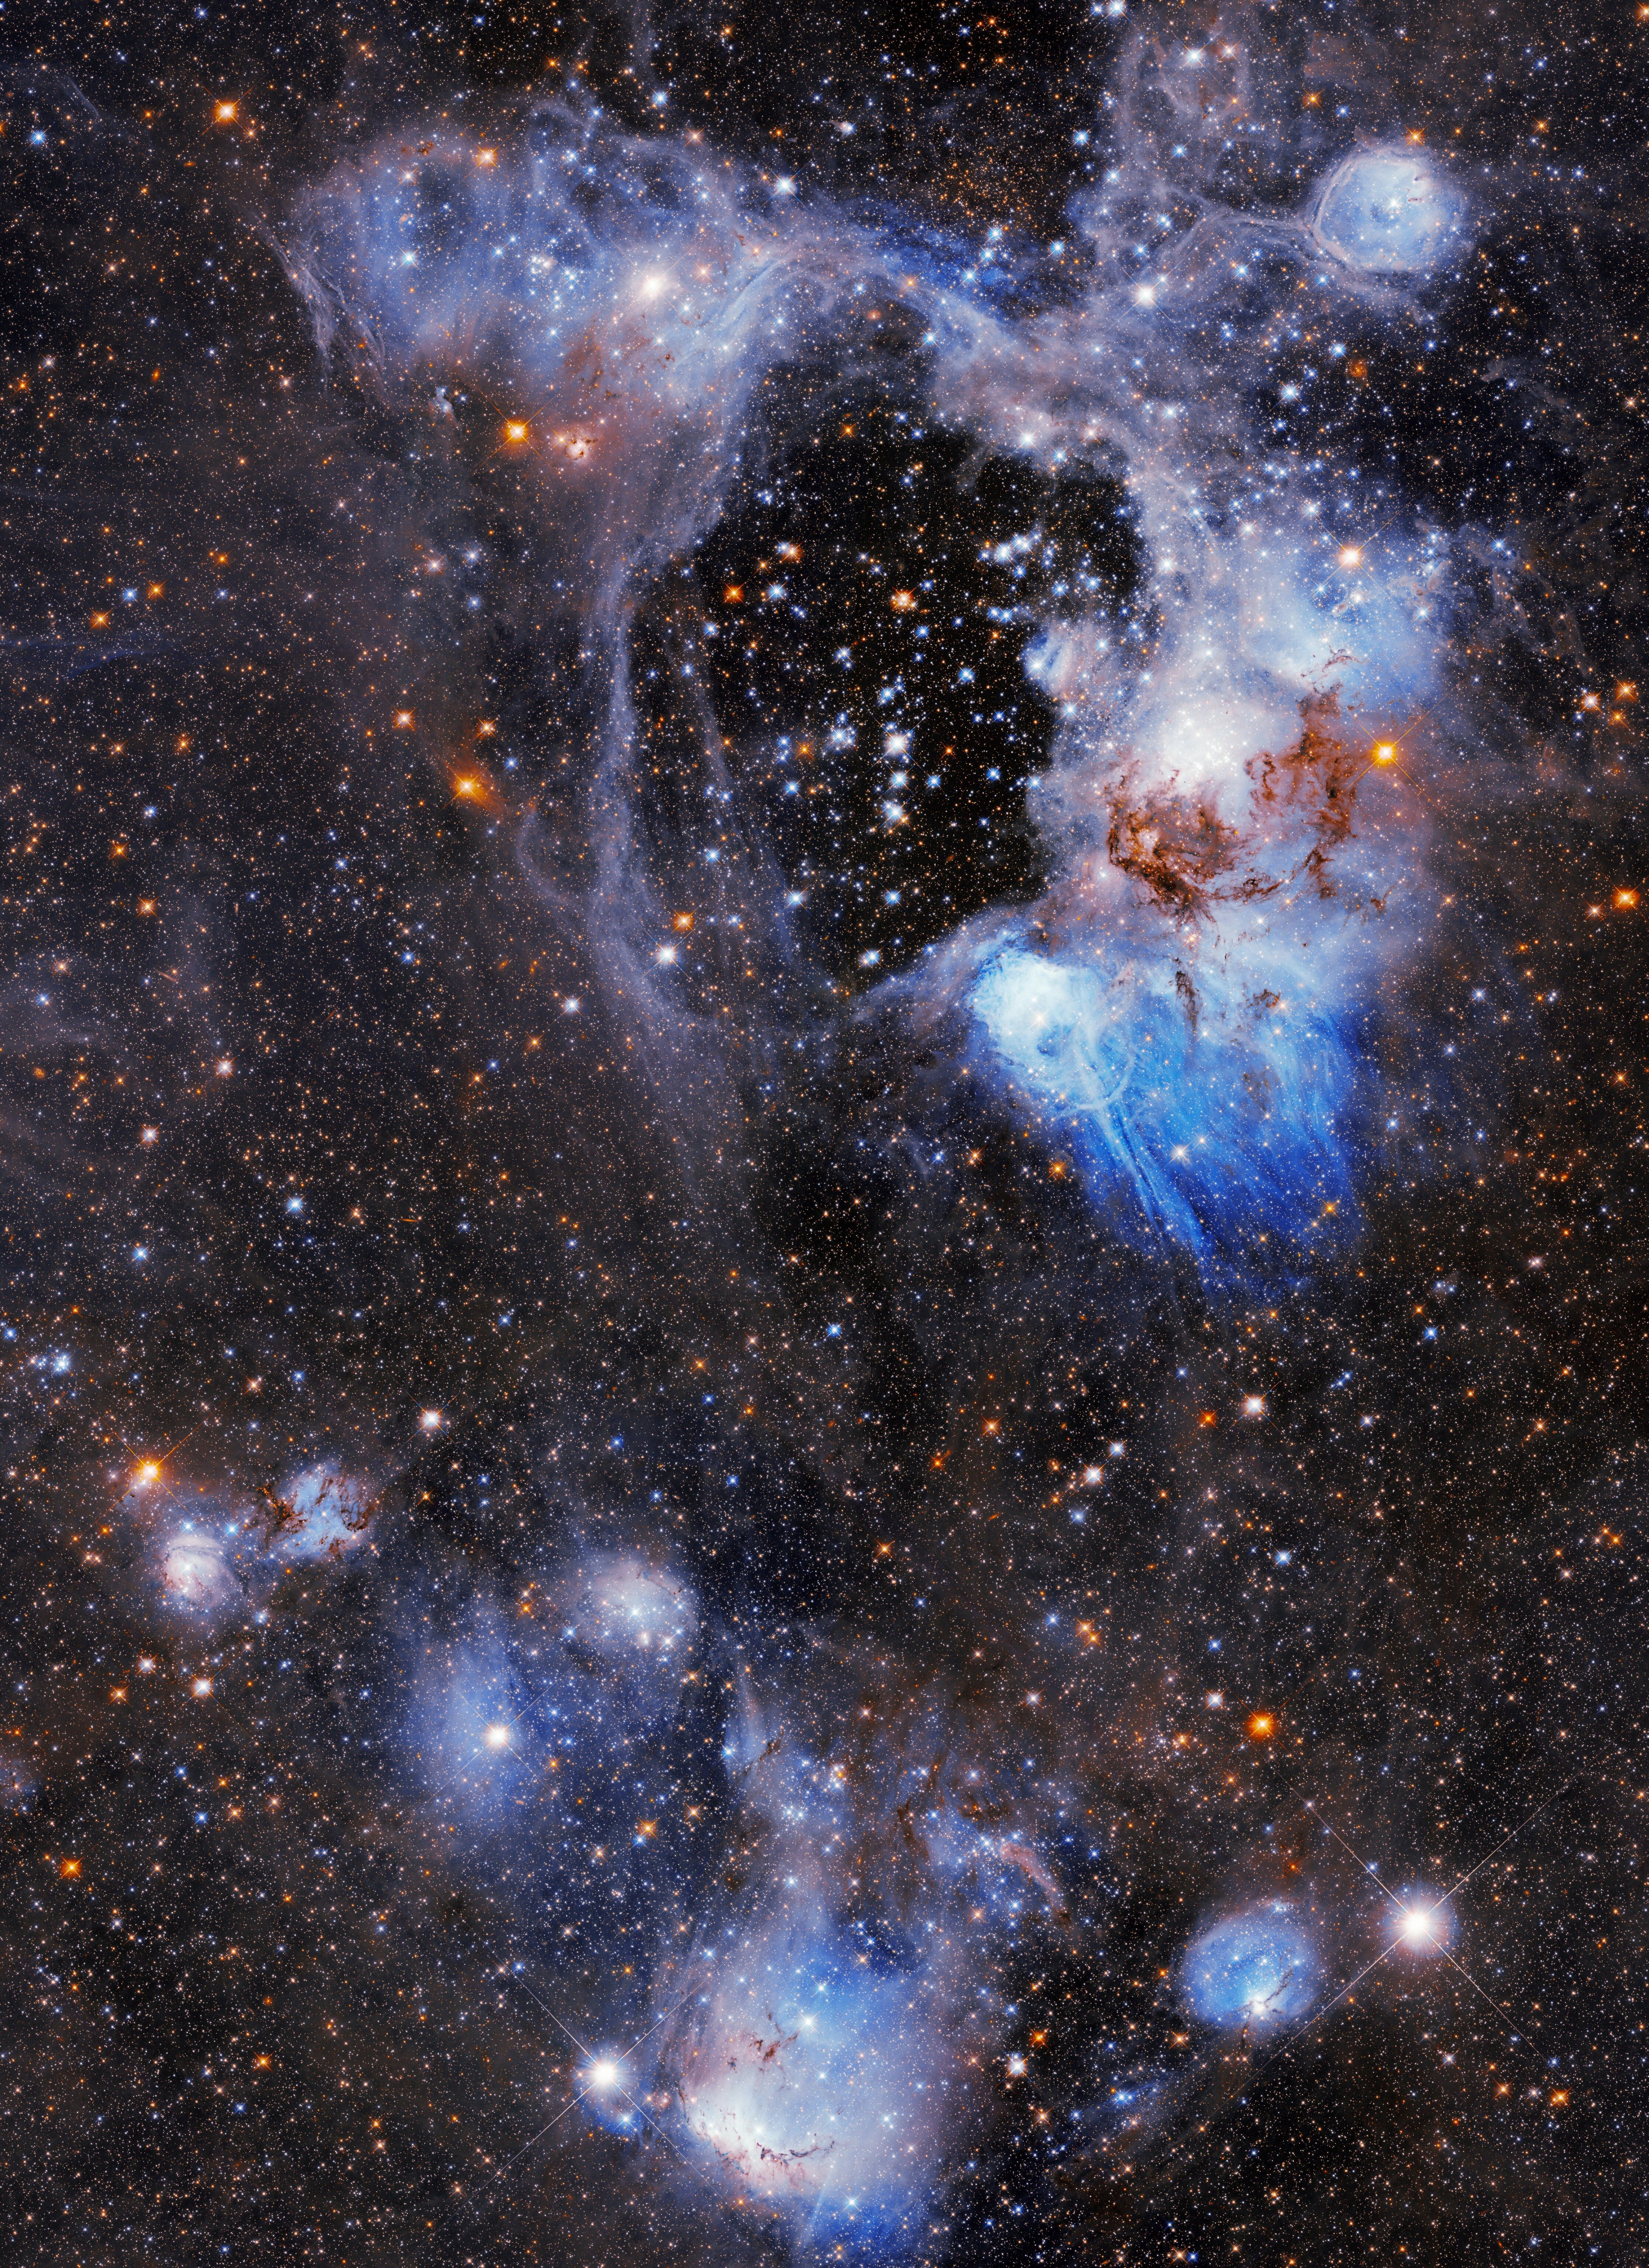 Nebula image of bright blue, purple dust surrounded by stars of all sorts of colors. At the top of the image, a large nebula with swirls and clouds of dust and gas is present, at the bottom of the image, a smaller nebula with bright white stars.